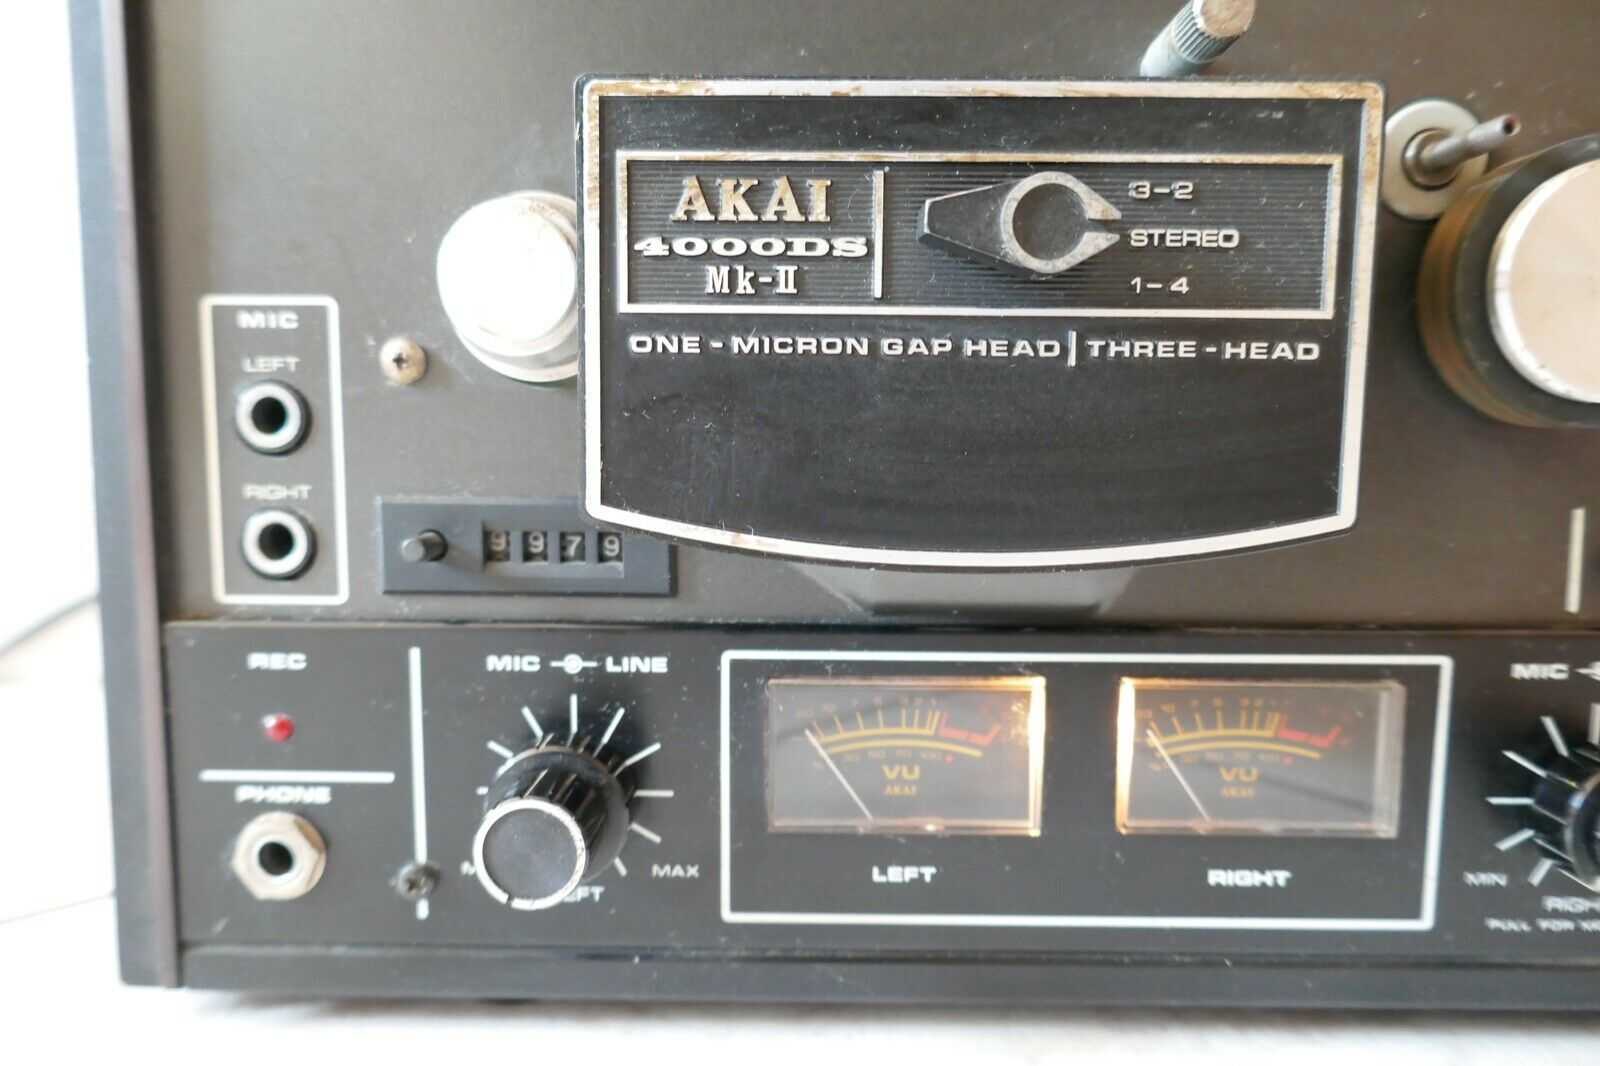 tape recorder magnétophone bande akai 4000DS MK-II vintage occasion